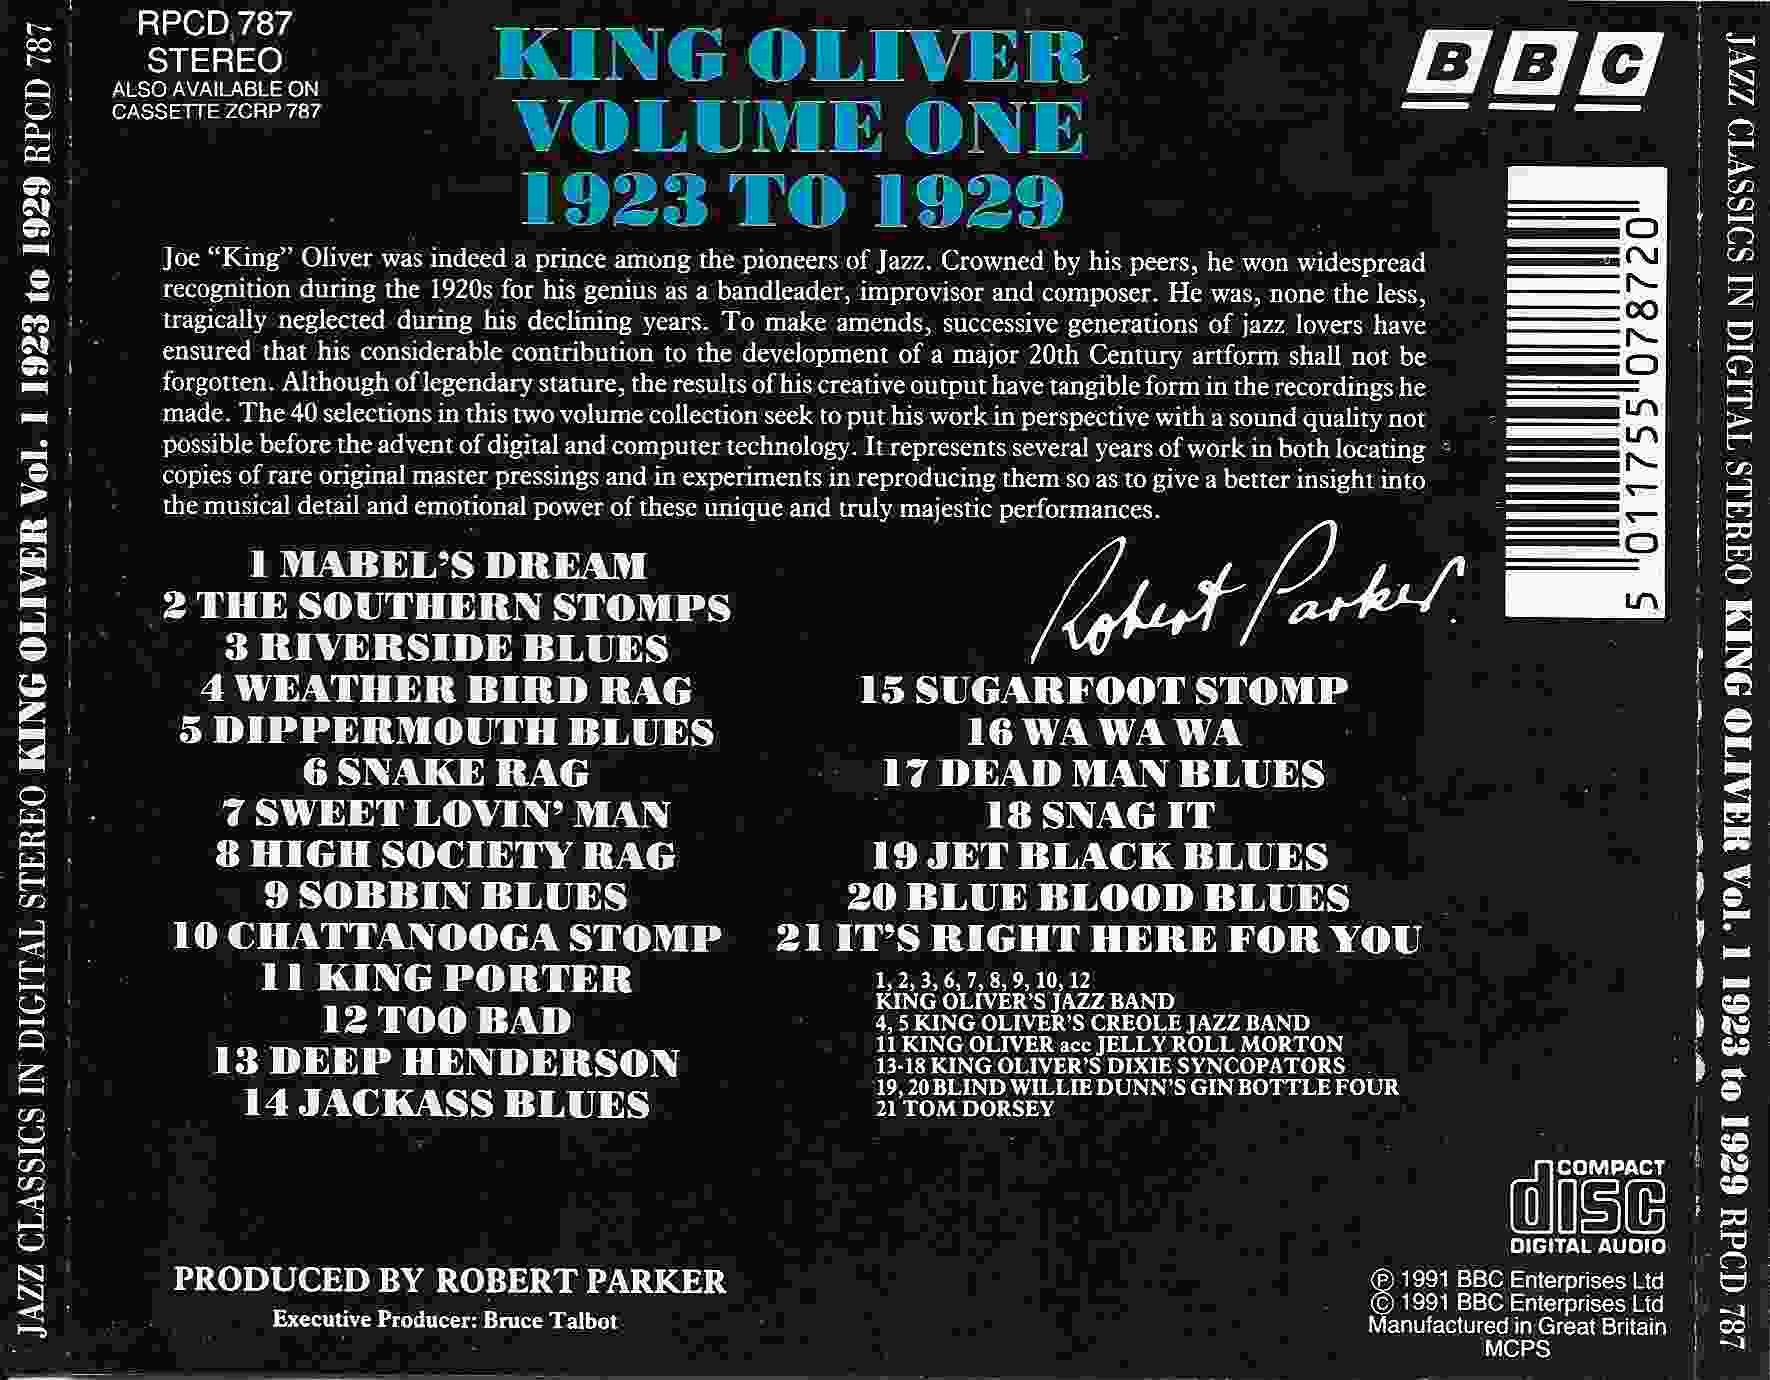 Back cover of RPCD 787